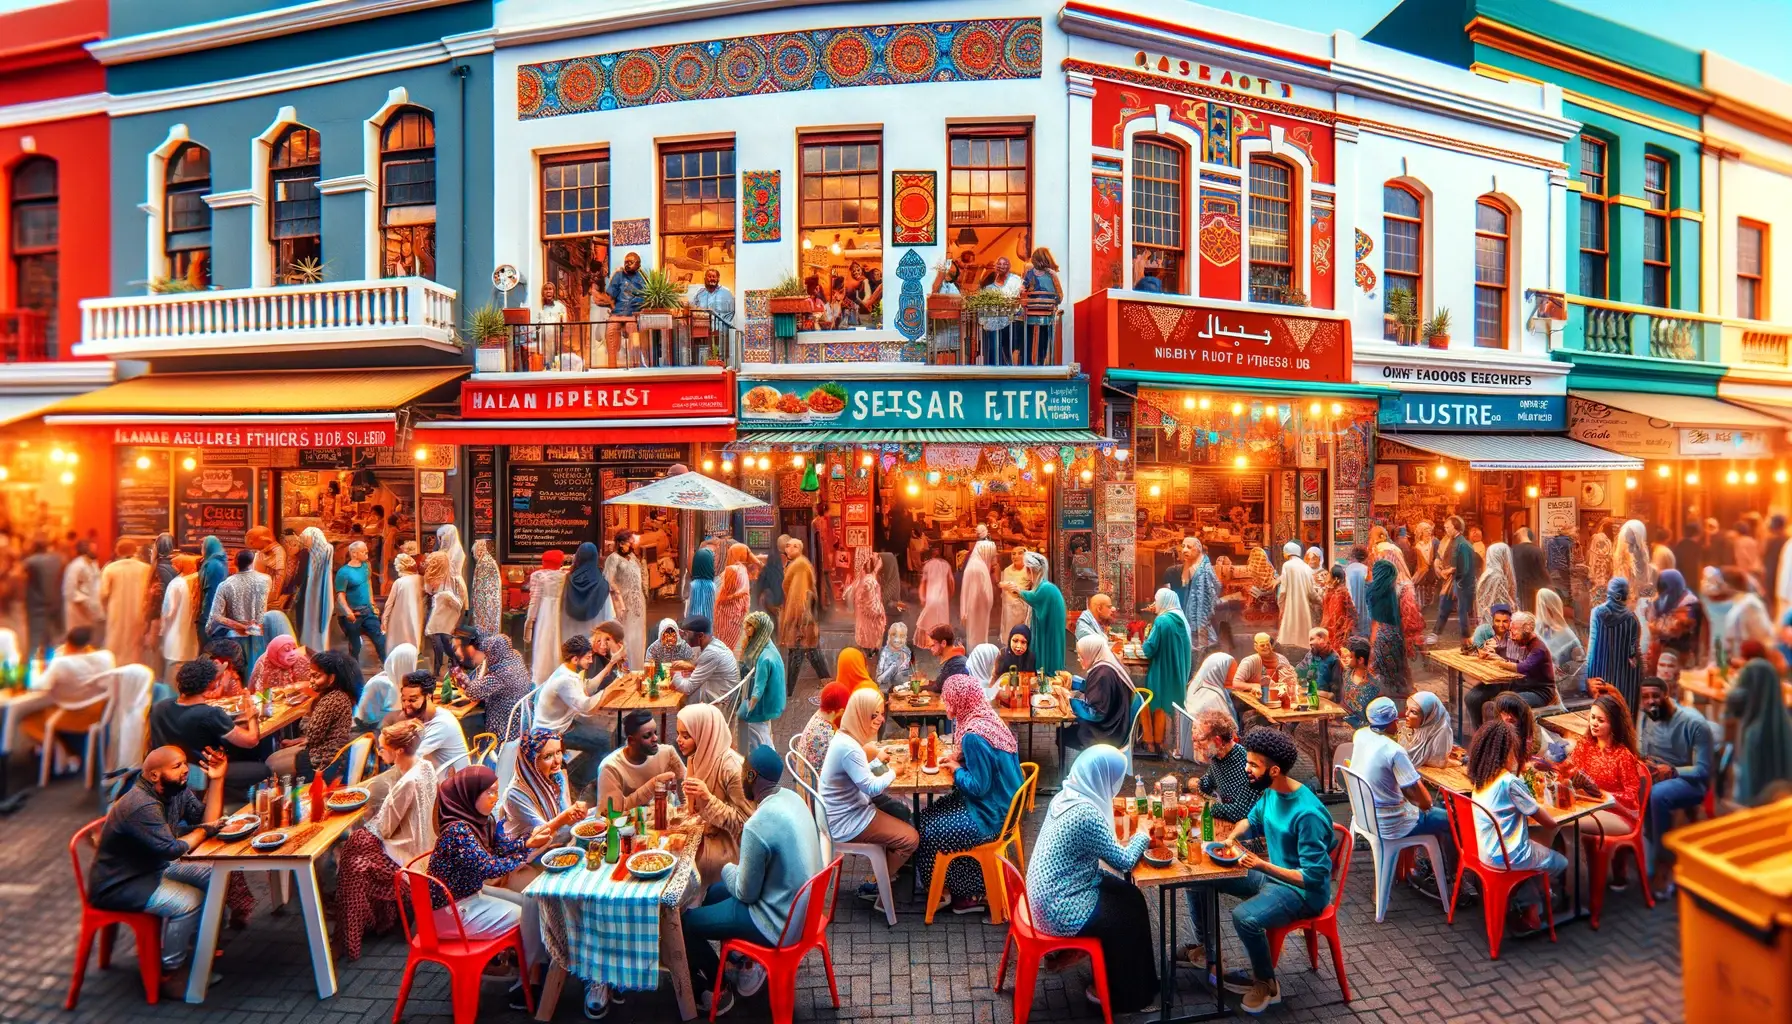 A vibrant and inclusive image showcasing the Halal dining scene in Cape Town